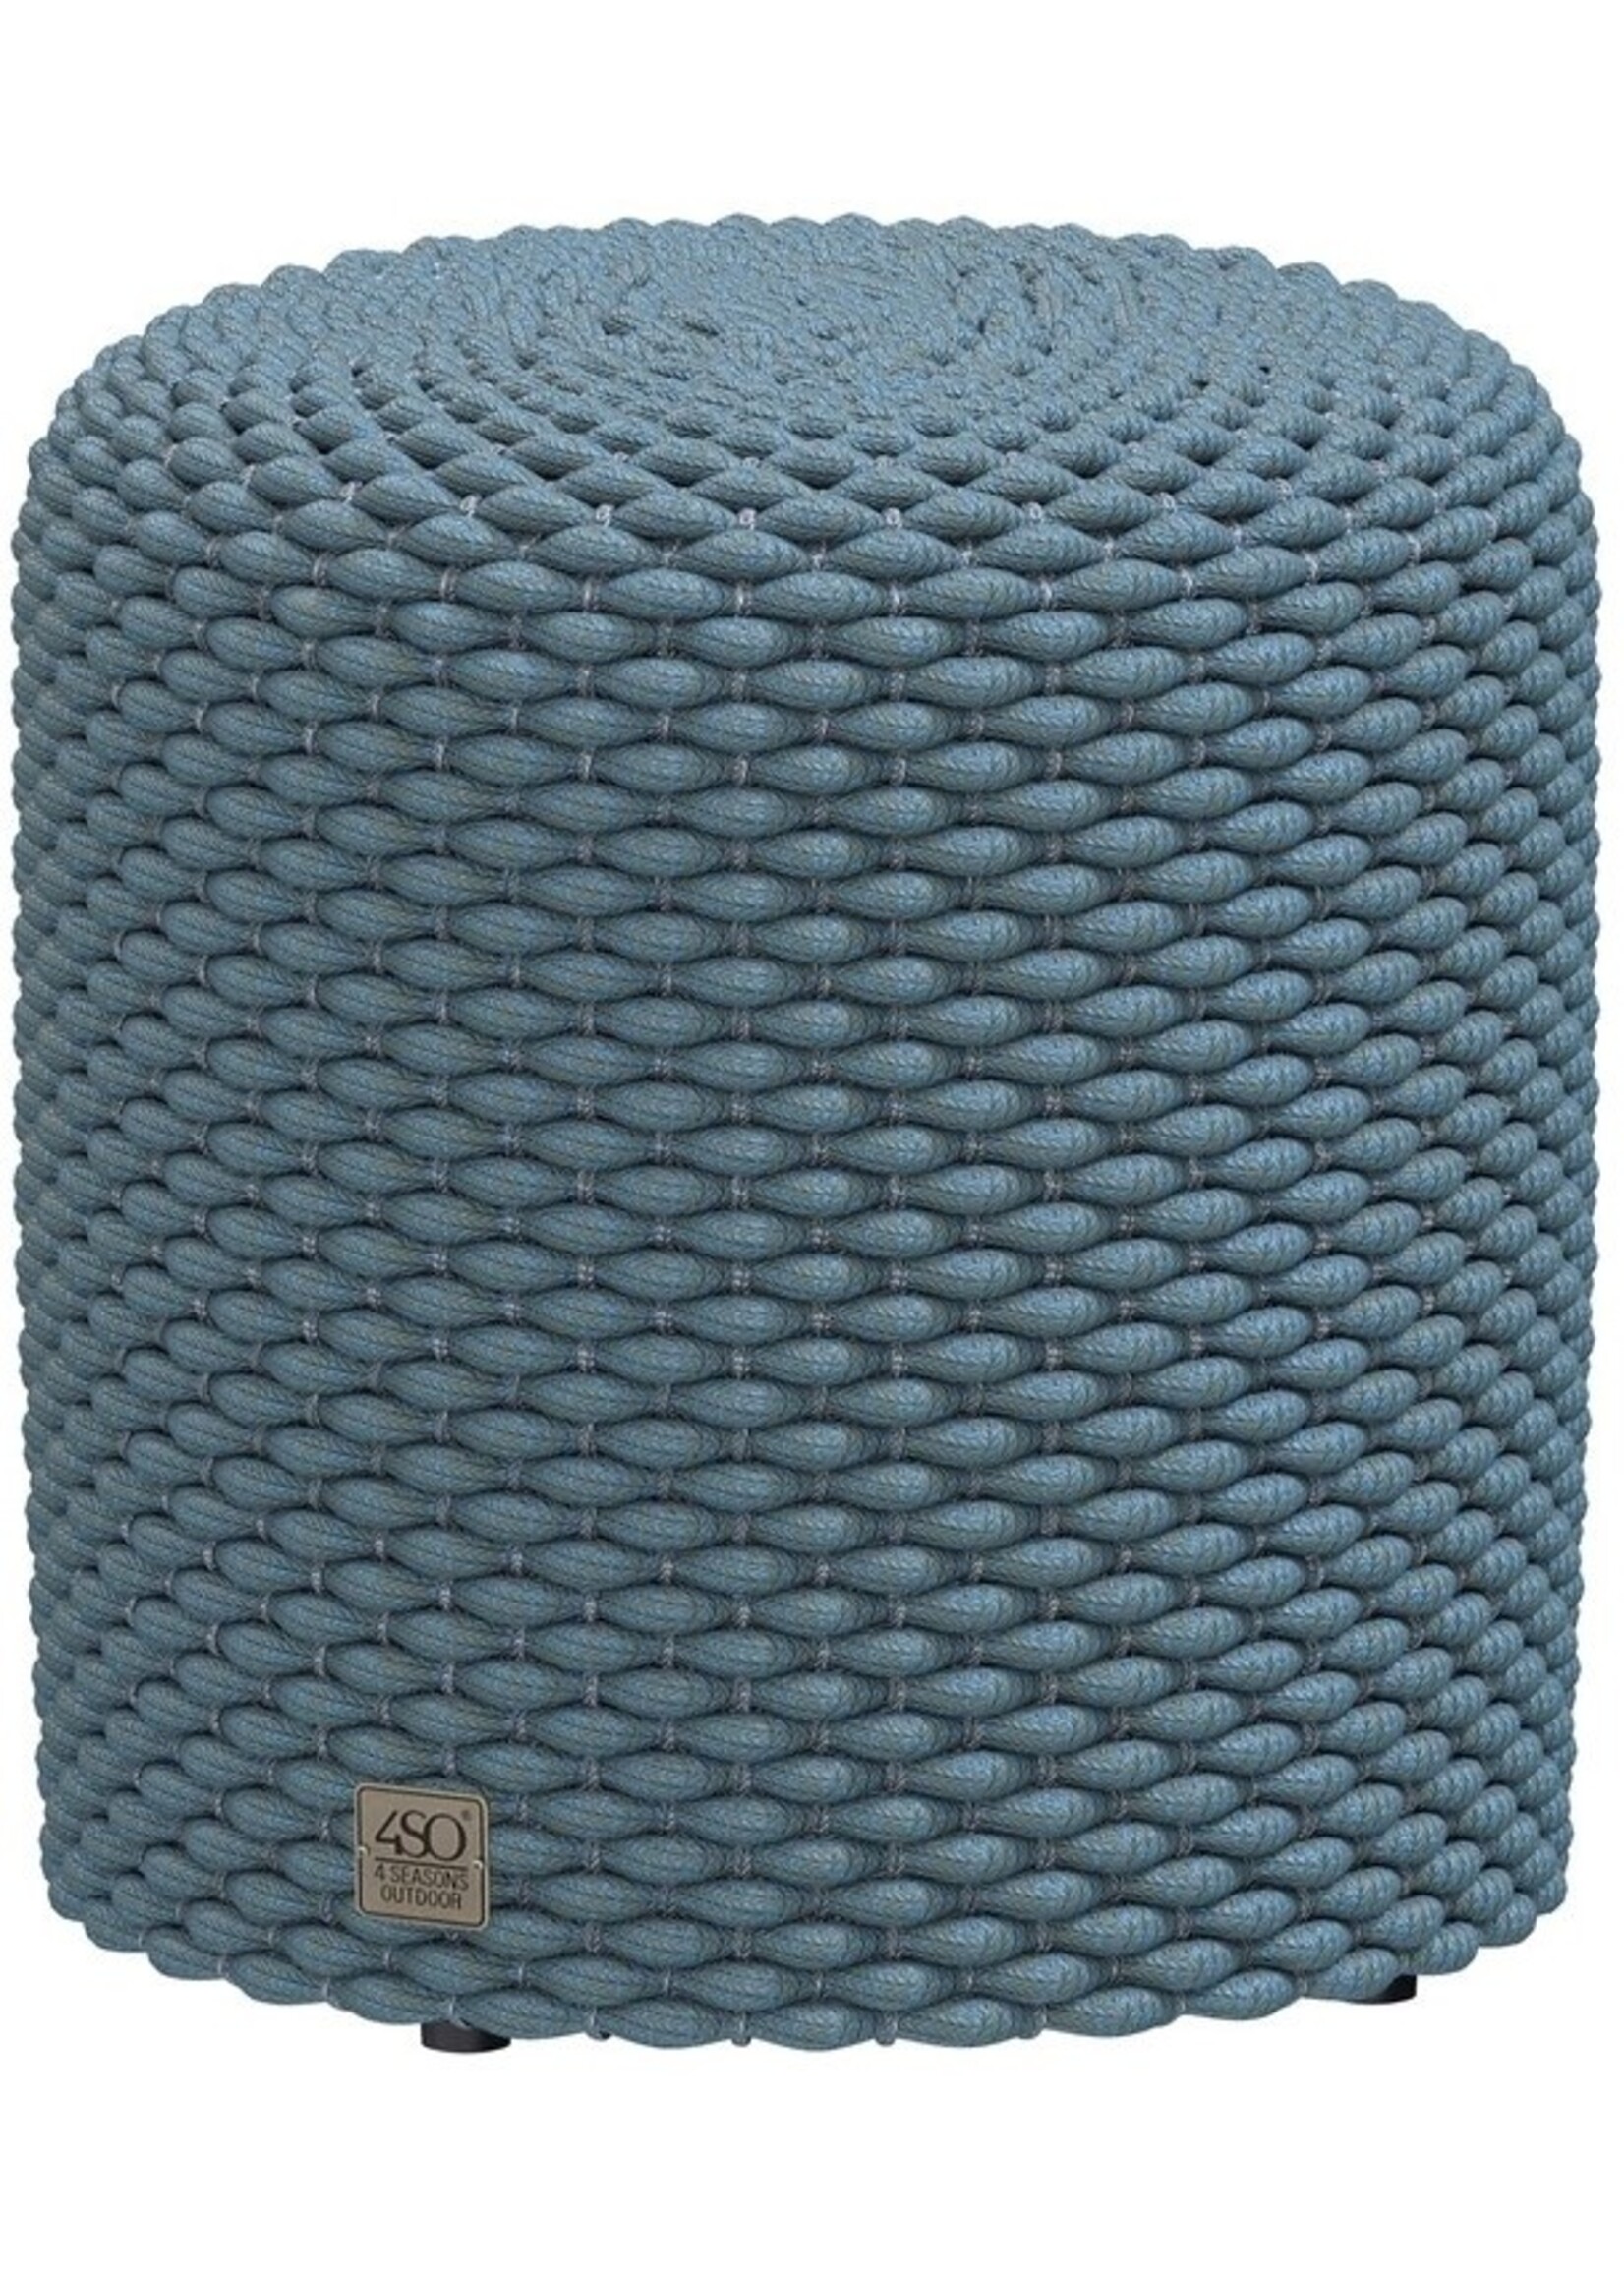 4SO 4SO Muffin Rope round 40 cm (H42) Blue